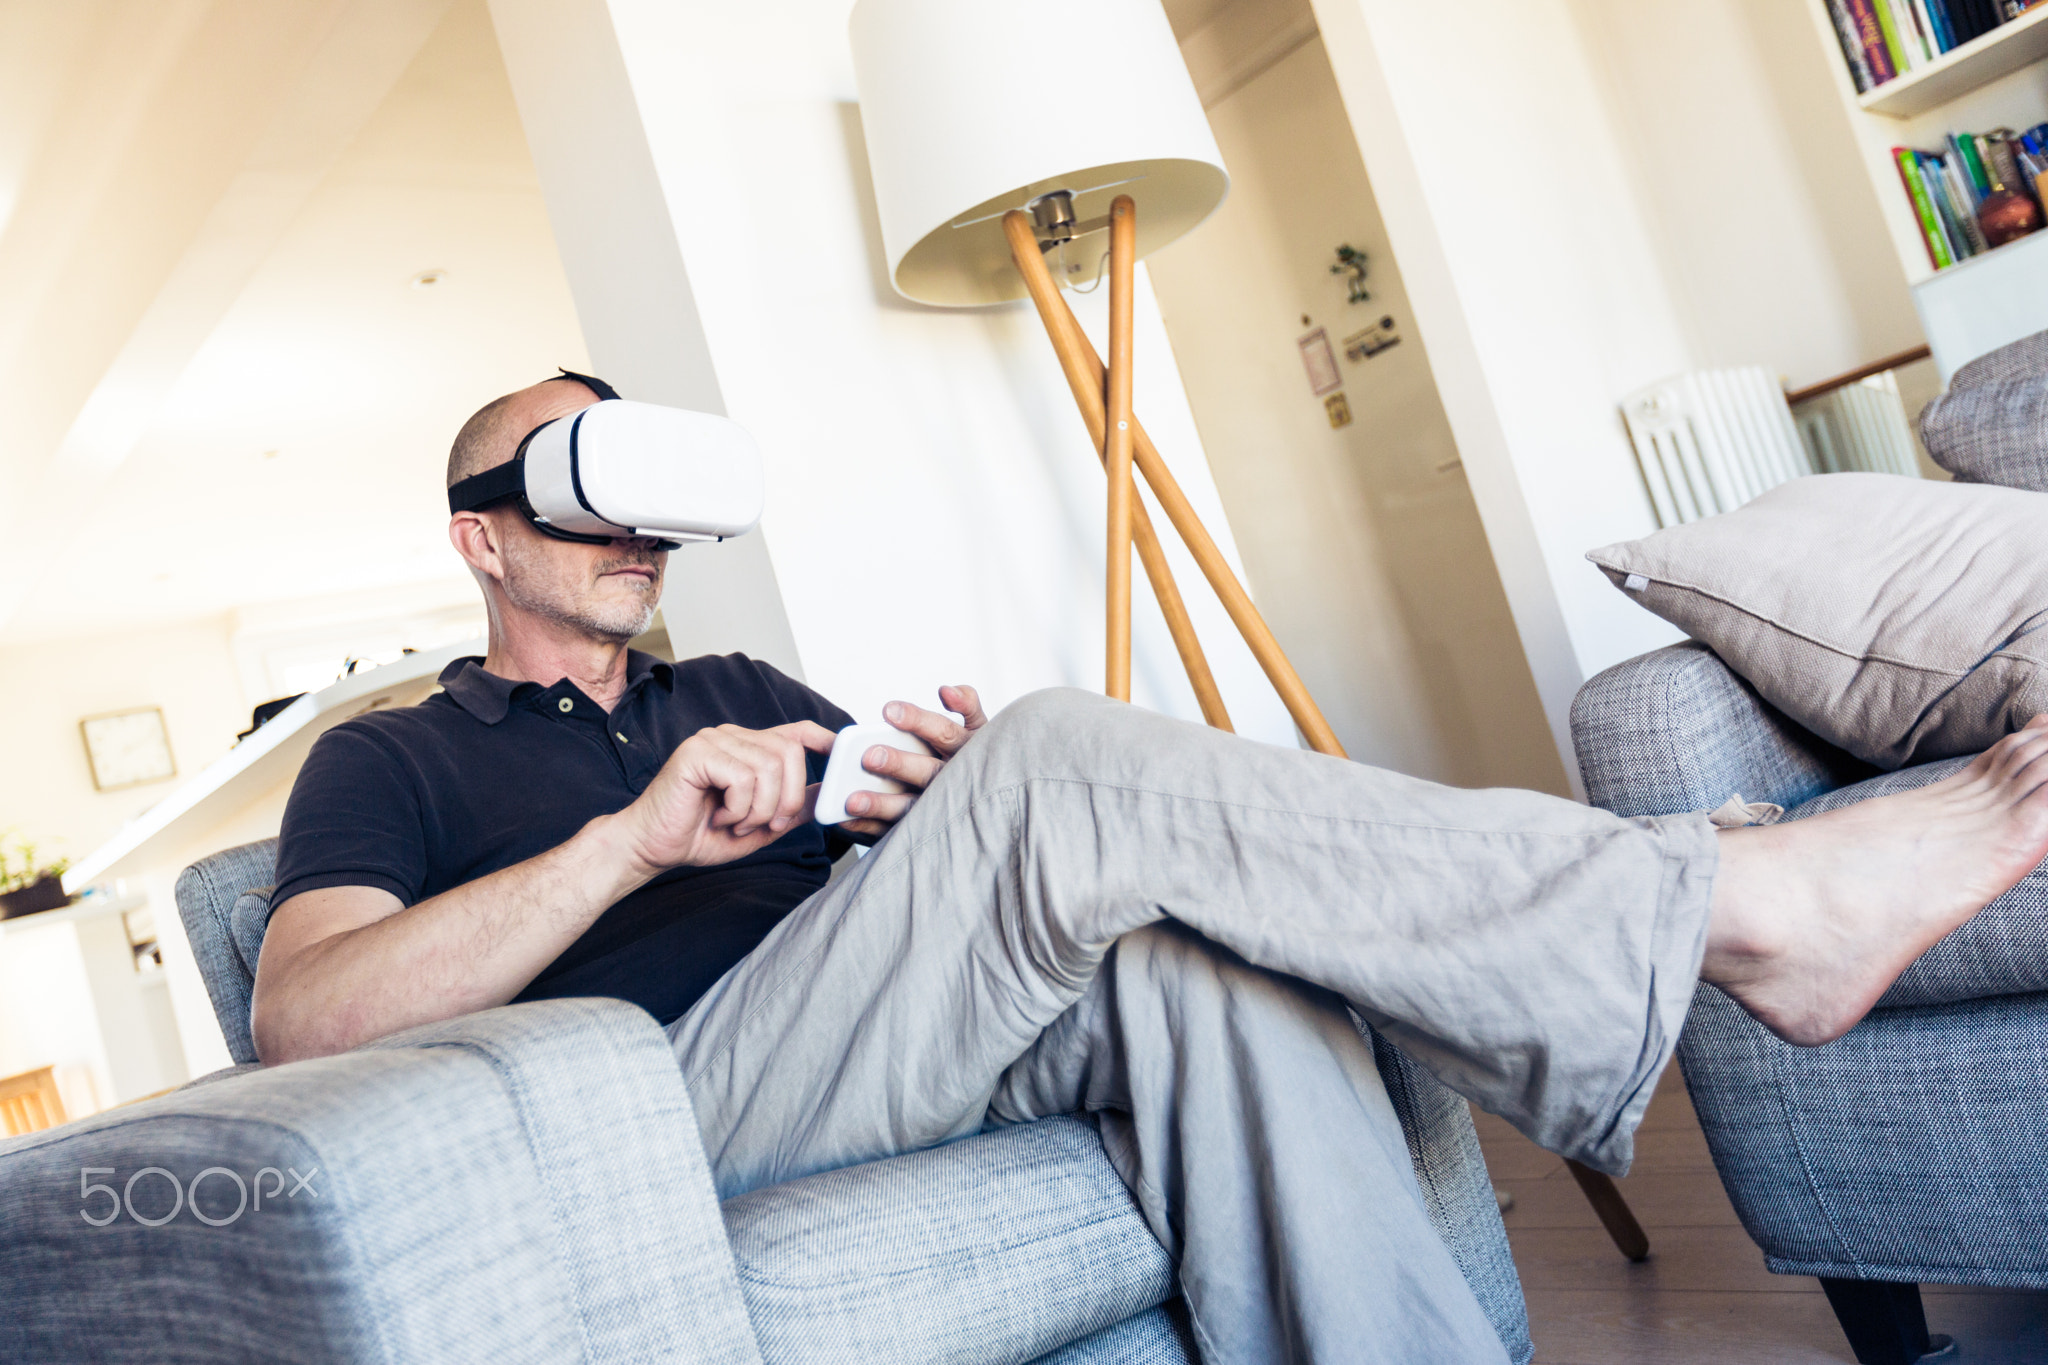 Adult Man Using Vr Goggles At Home